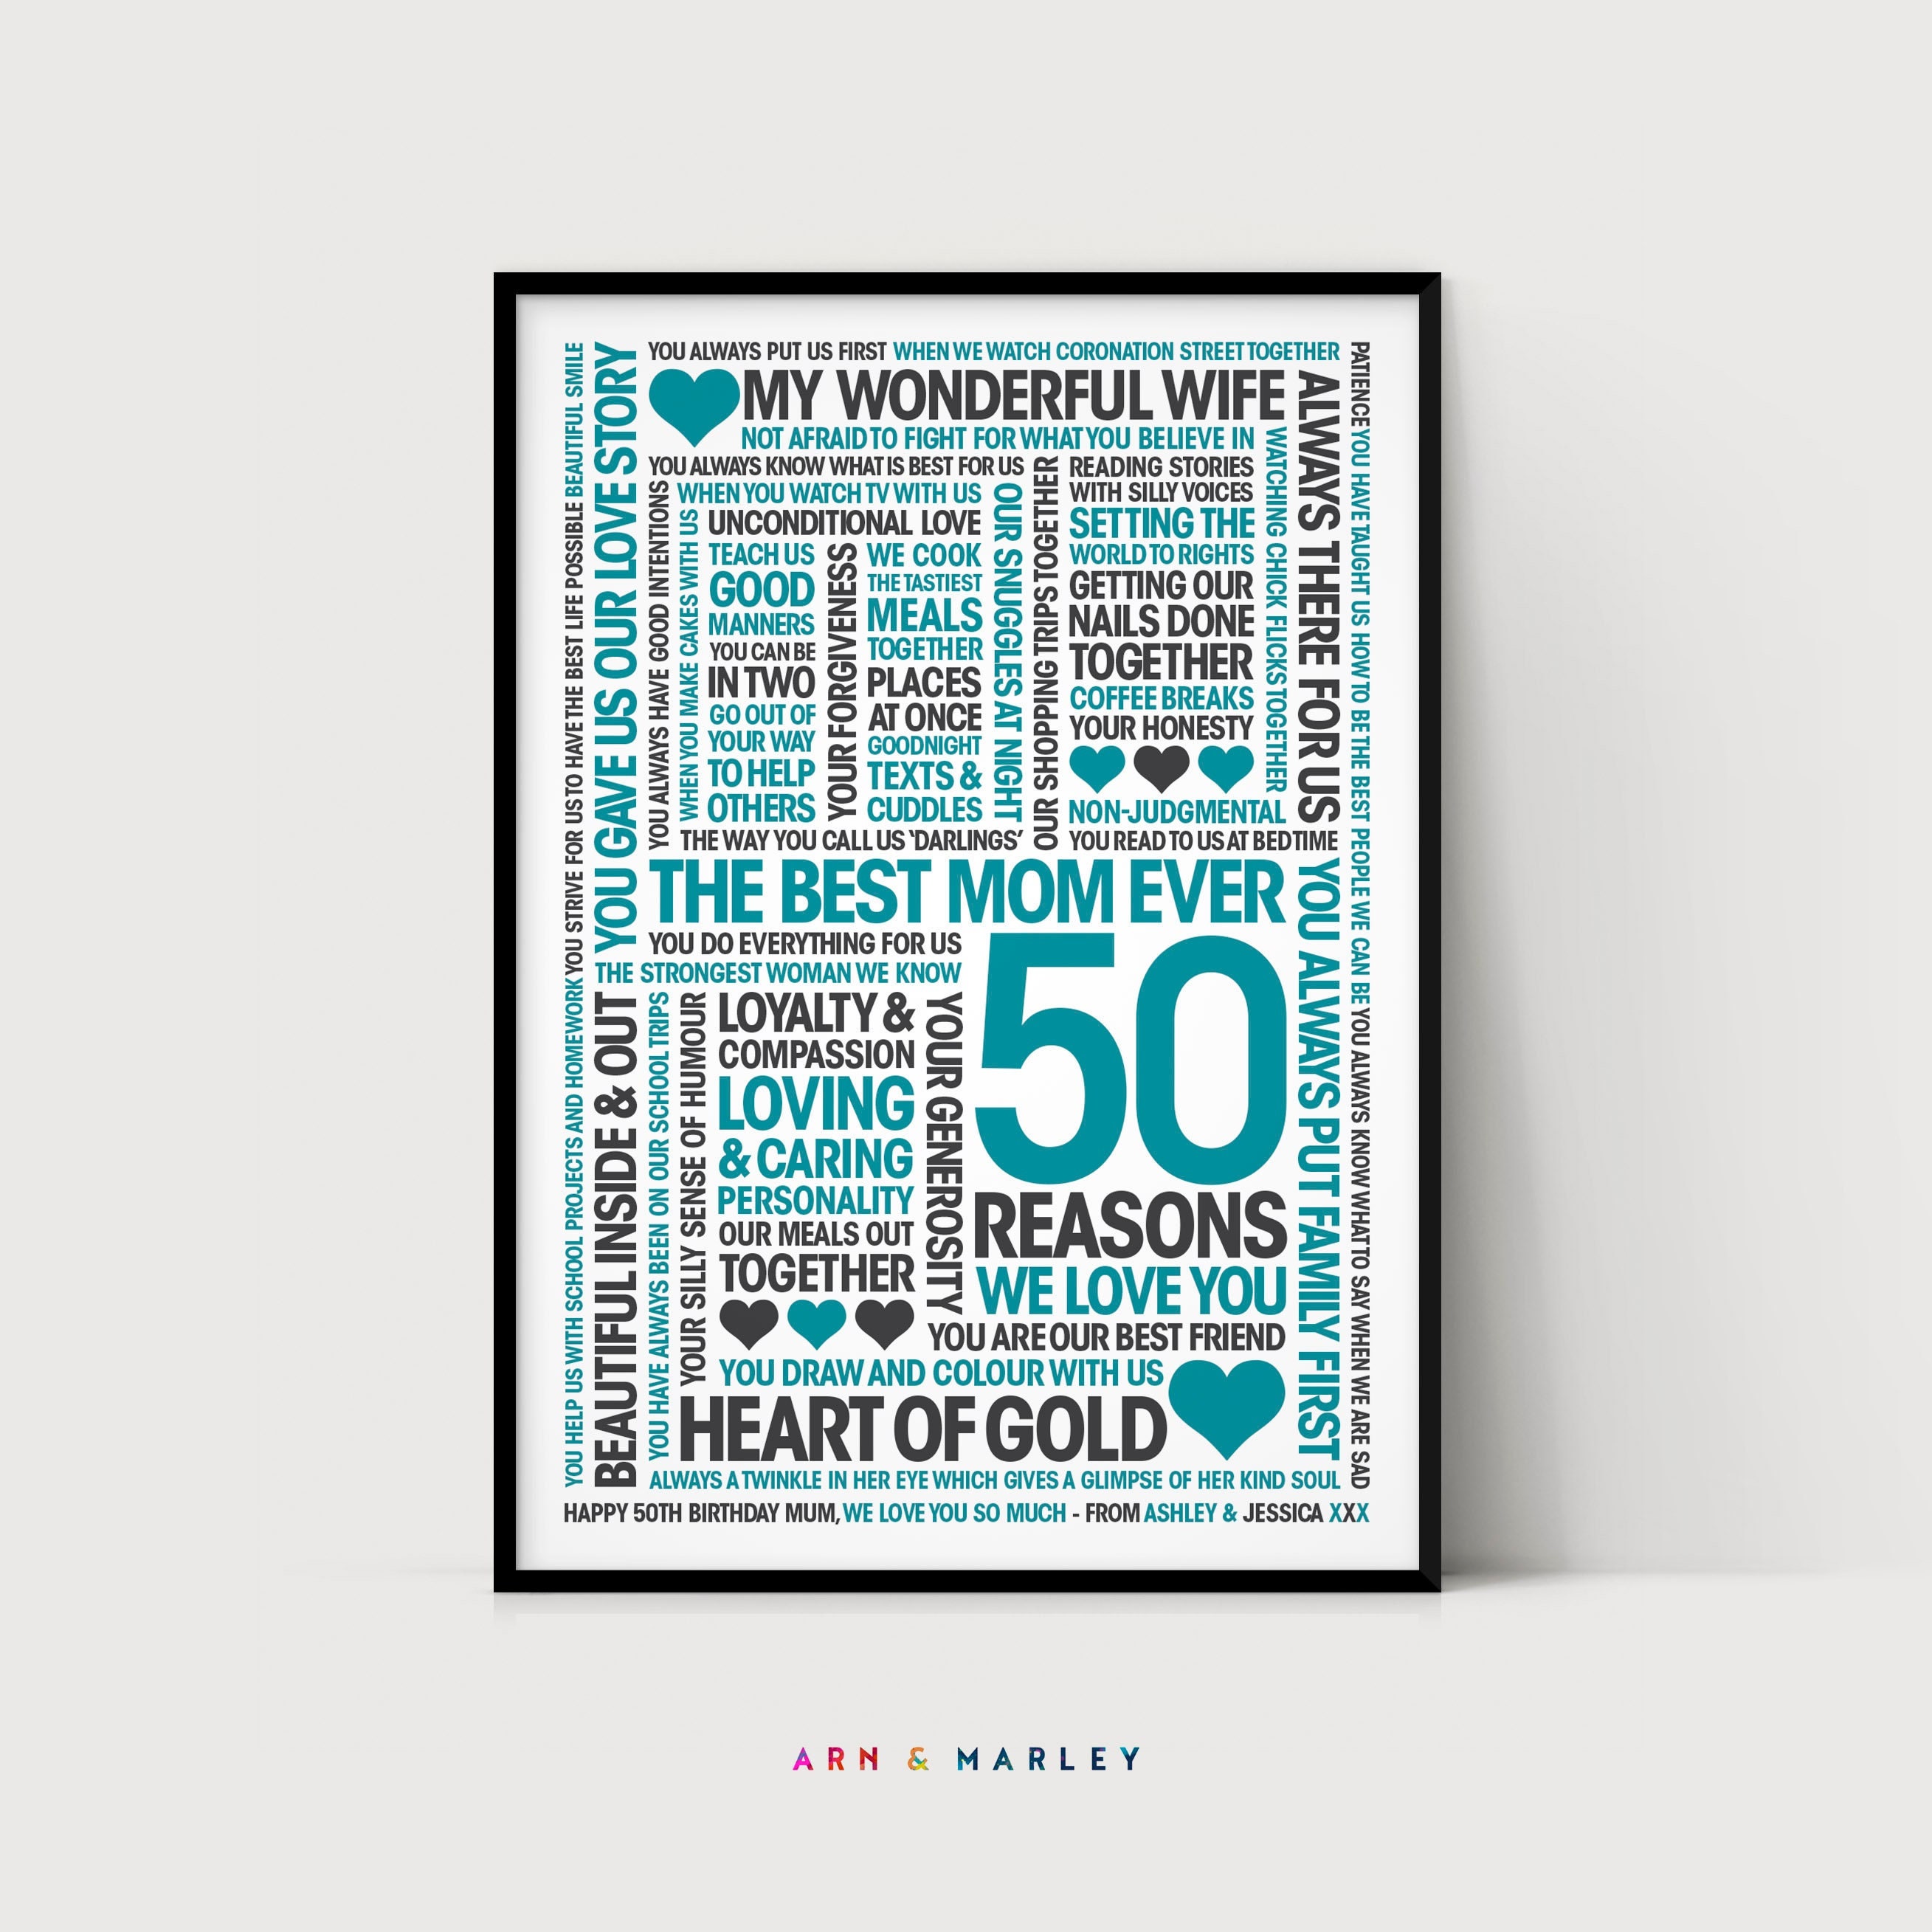 50 Reasons We Love You, Personalized 50th for Mom, Mum's Birthday